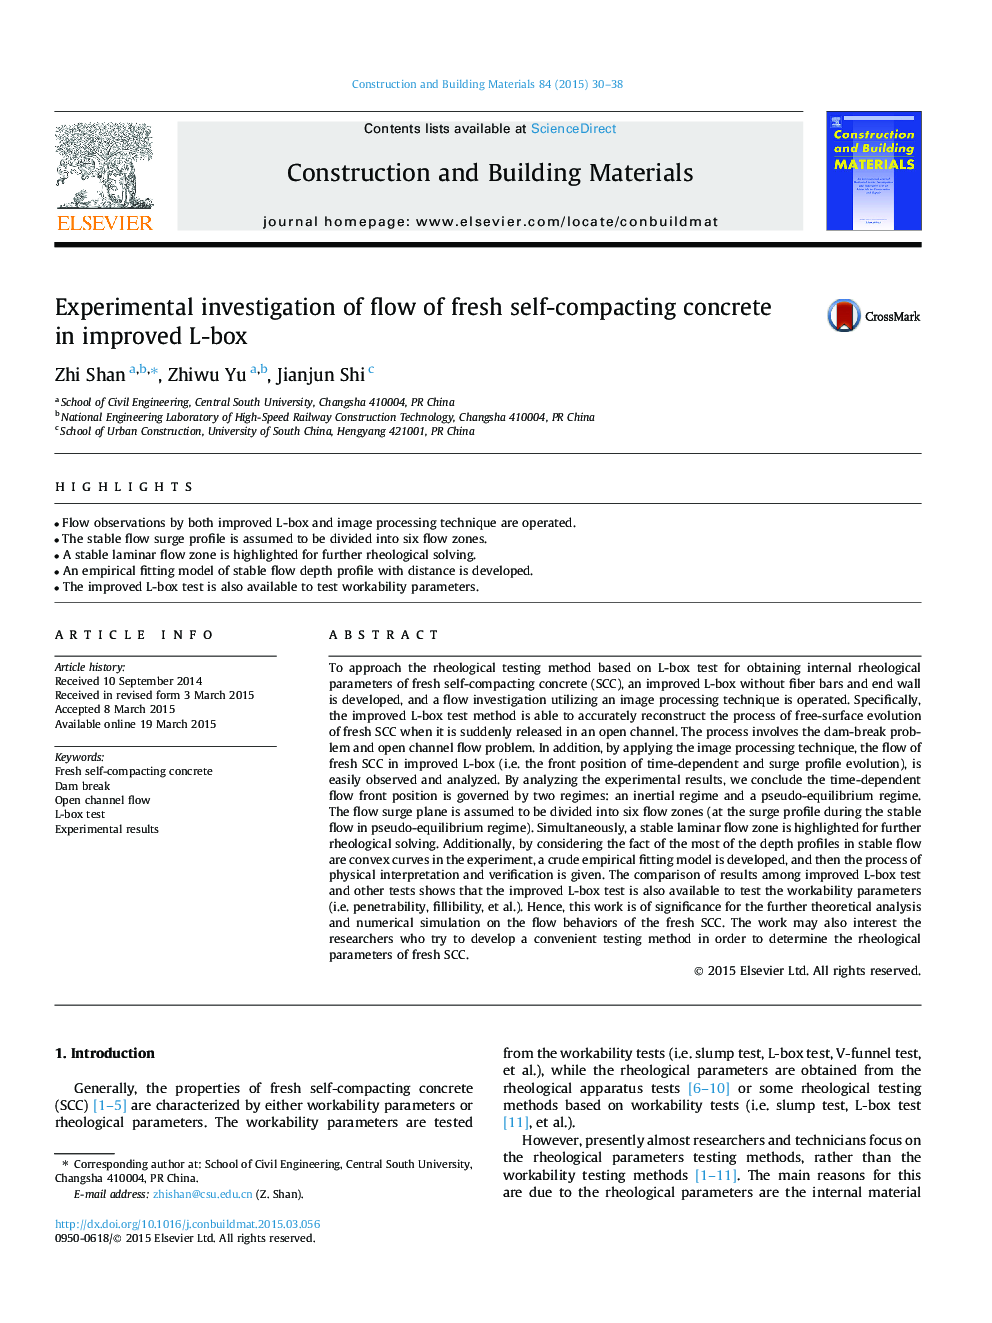 Experimental investigation of flow of fresh self-compacting concrete in improved L-box